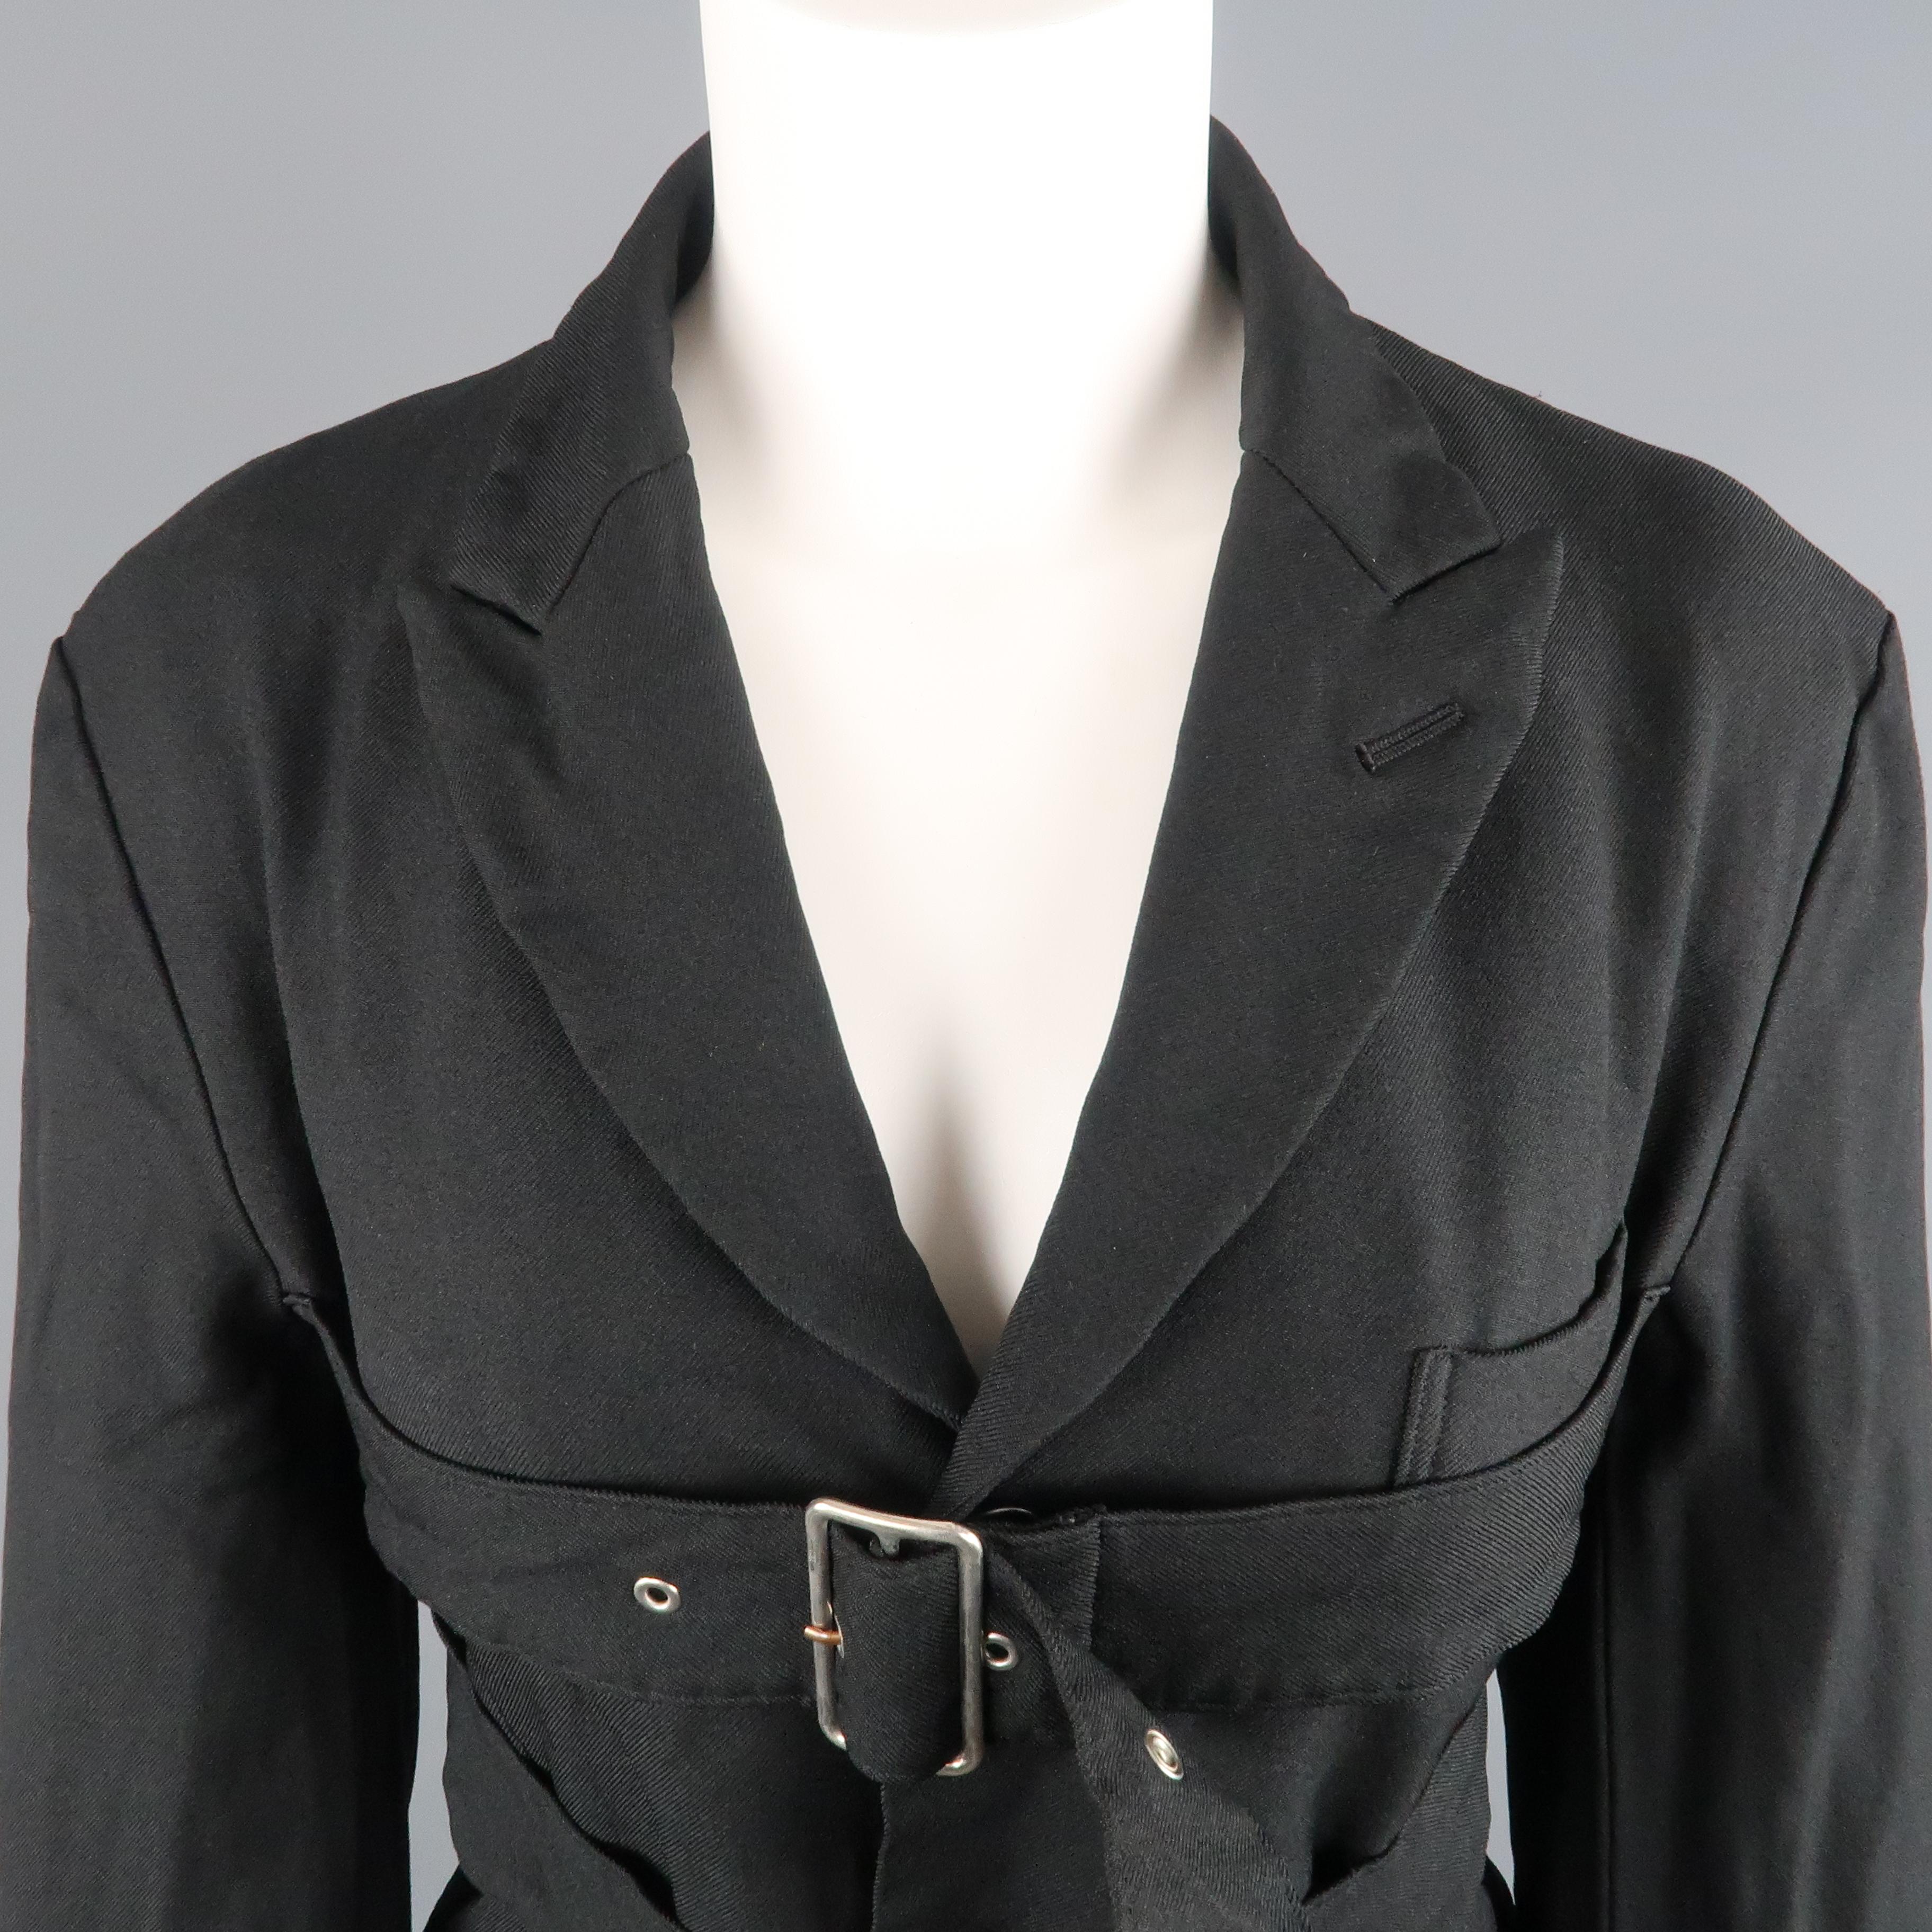 COMME des GARCONS BLACK blazer comes in wrinkle textured polyester twill with a peak lapel, single breasted three button front, functional button cuff sleeves, and double belted front details. Made in Japan.
 
Excellent Pre-Owned Condition.
Marked: